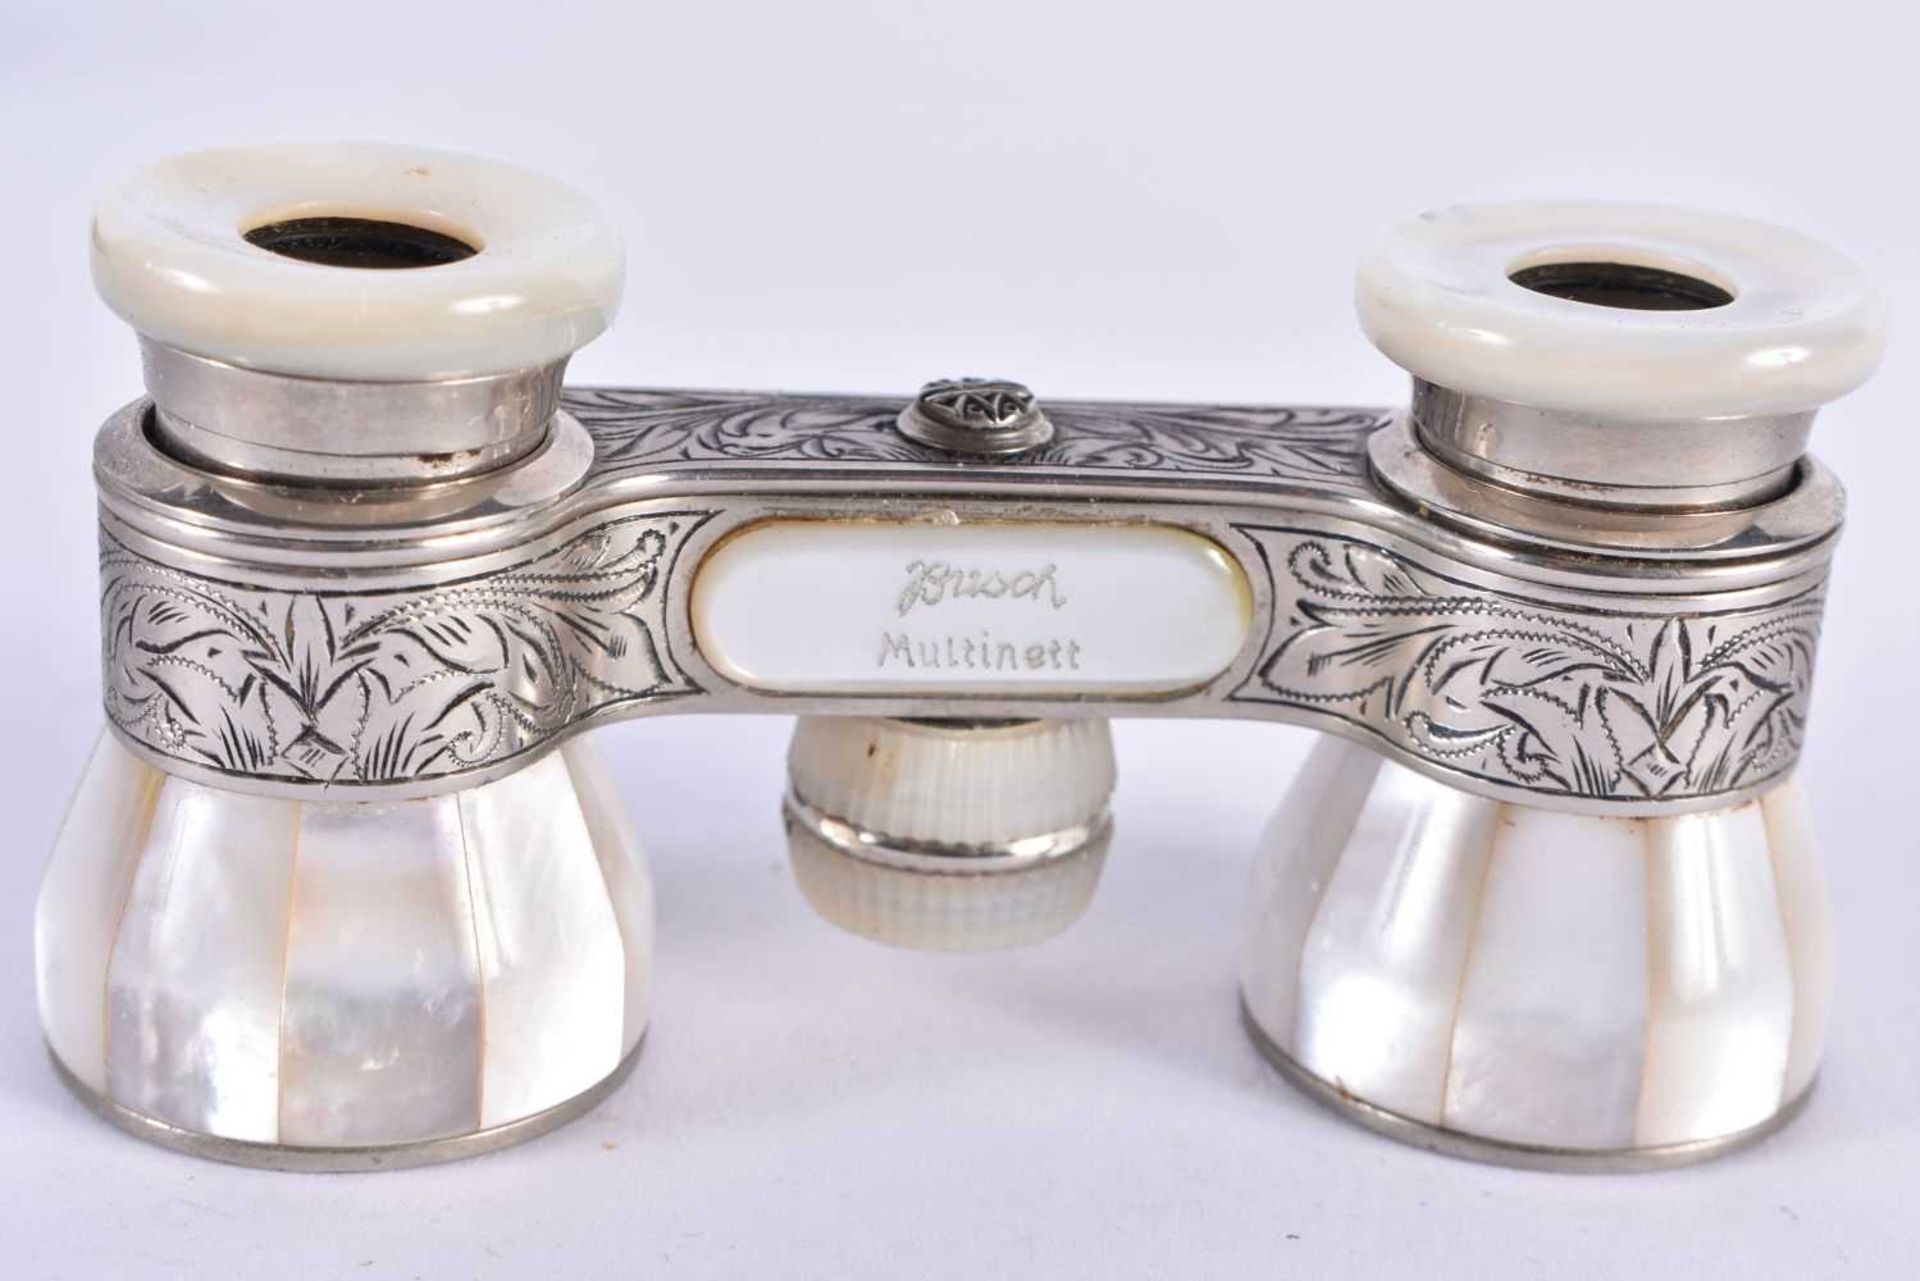 A PAIR OF MOTHER OF PEARL OPERA GLASSES. 7 cm x 6 cm extended. - Image 3 of 5